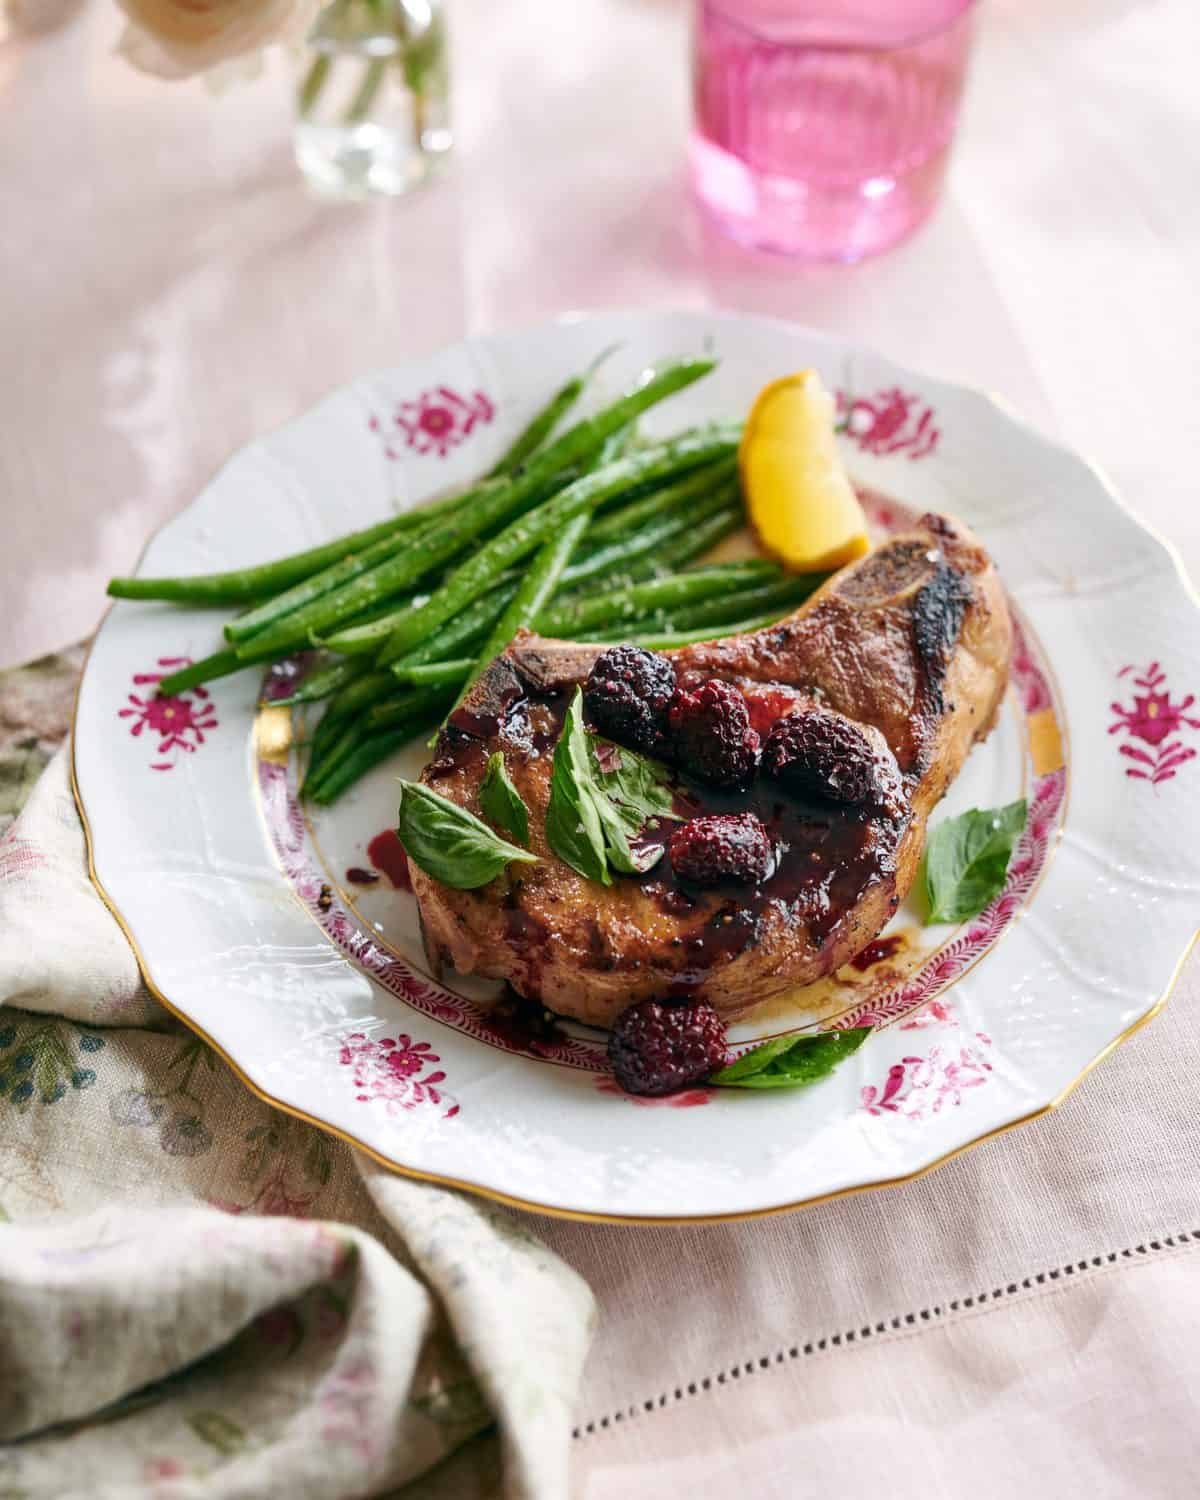 A pork chop covered in roasted blackberries next to green beans.